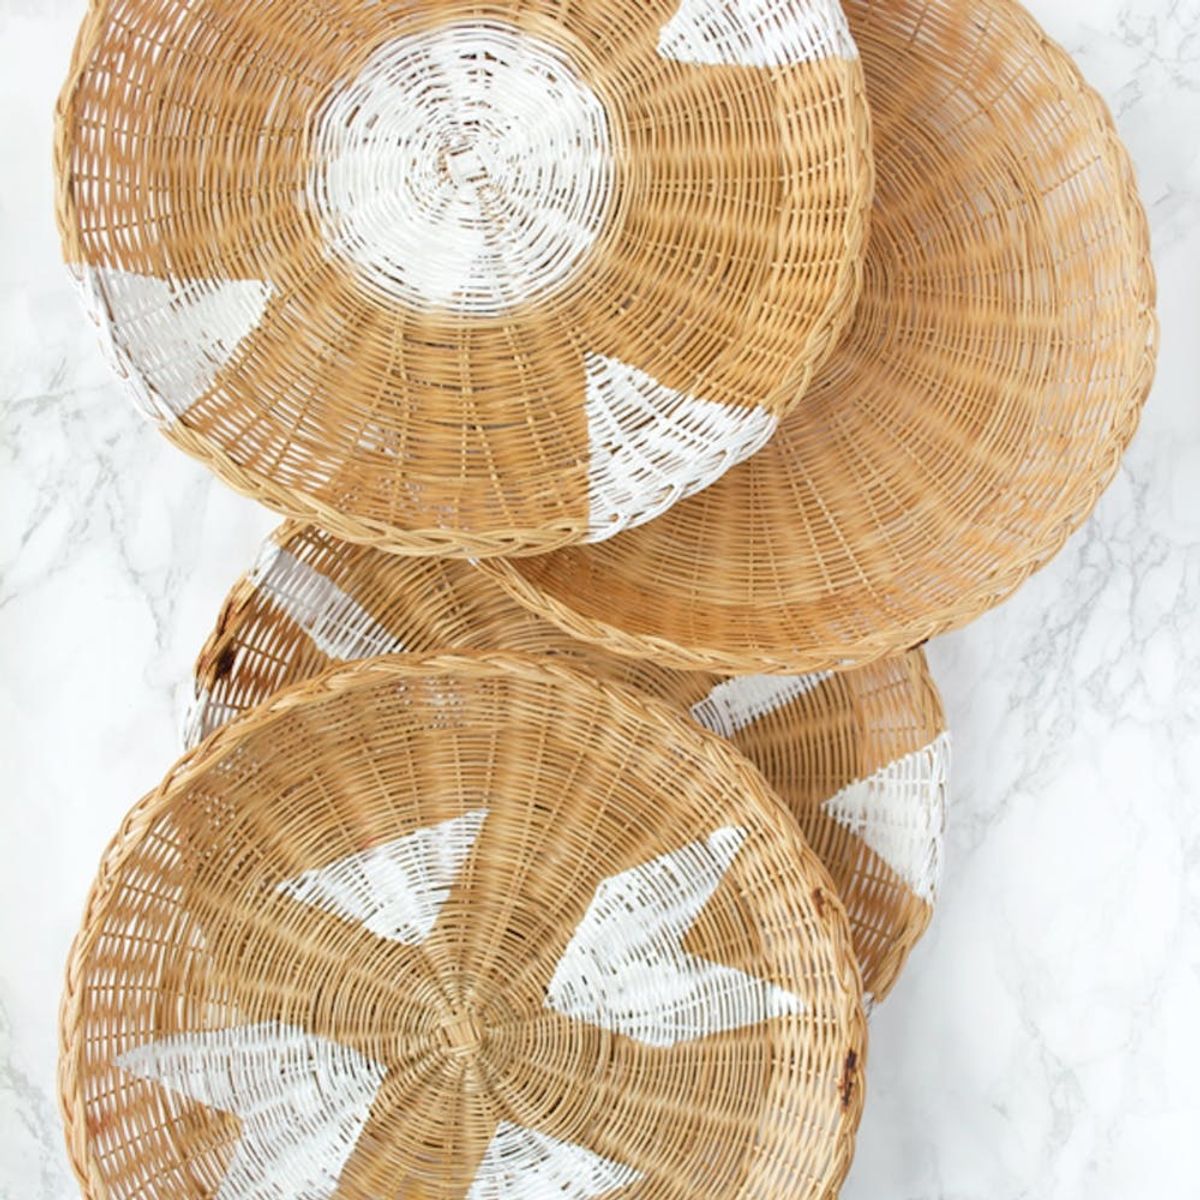 Your Modern Boho Nook Needs These DIY Painted Rattan Plate Holders